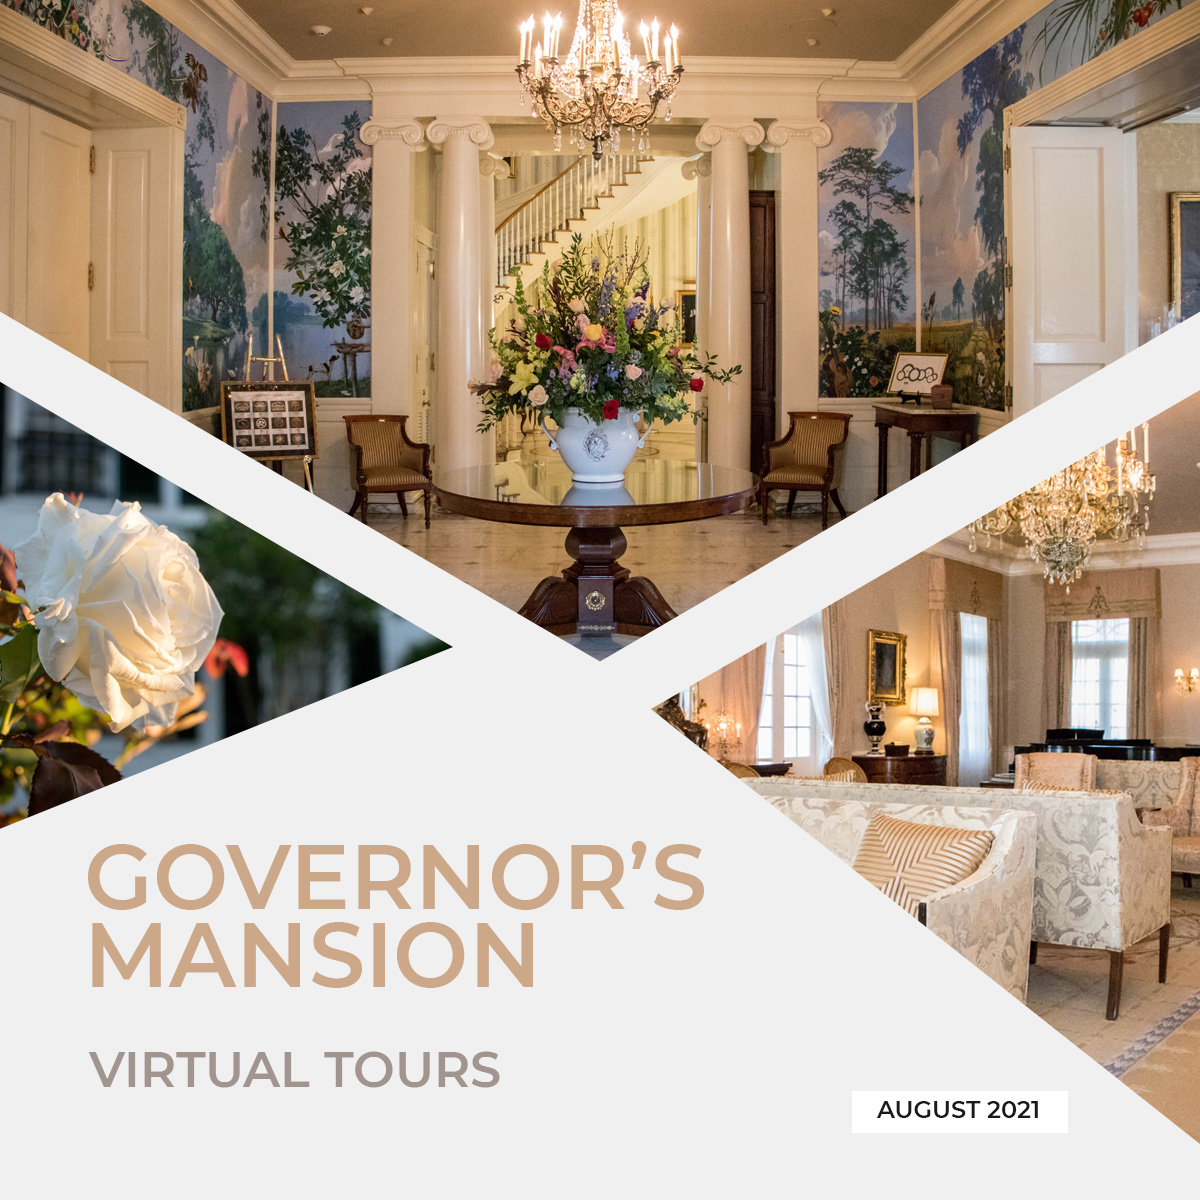 The Governor’s Mansion: Virtual Tours